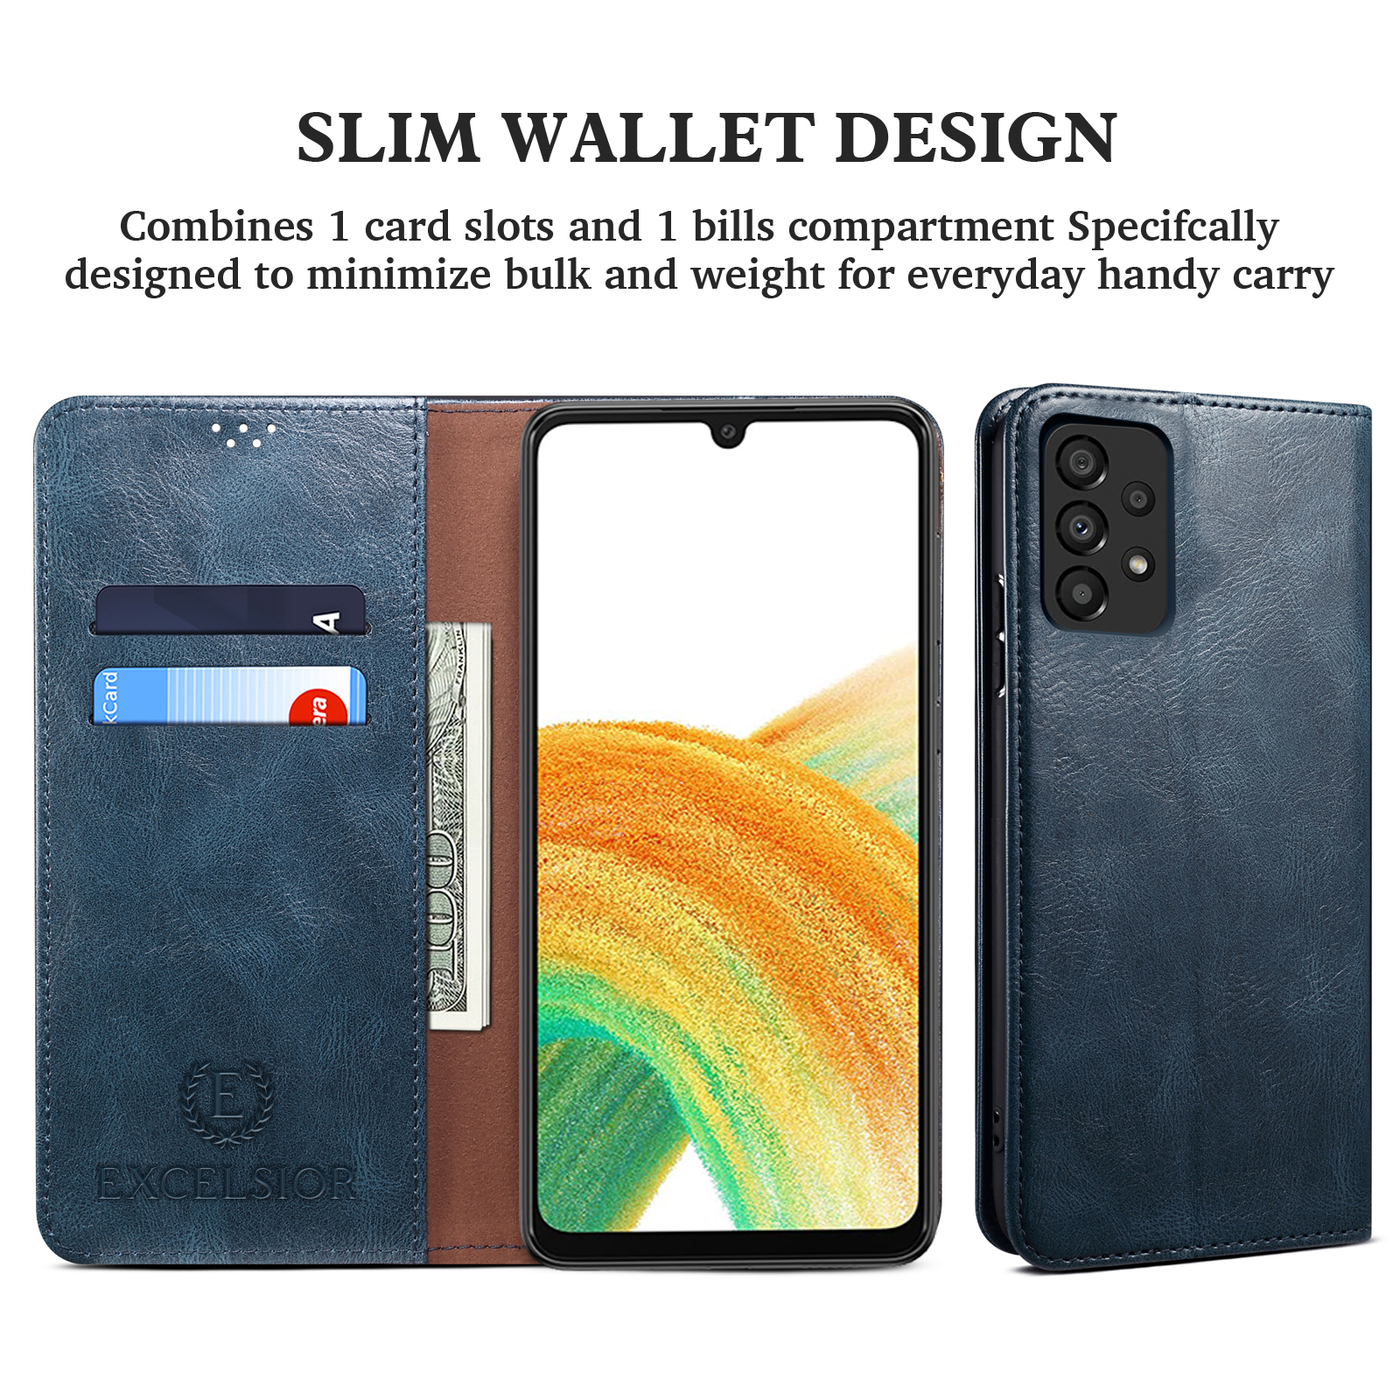 Excelsior Premium Vintage PU Leather Wallet flip Cover Case For Samsung Galaxy A73 5G